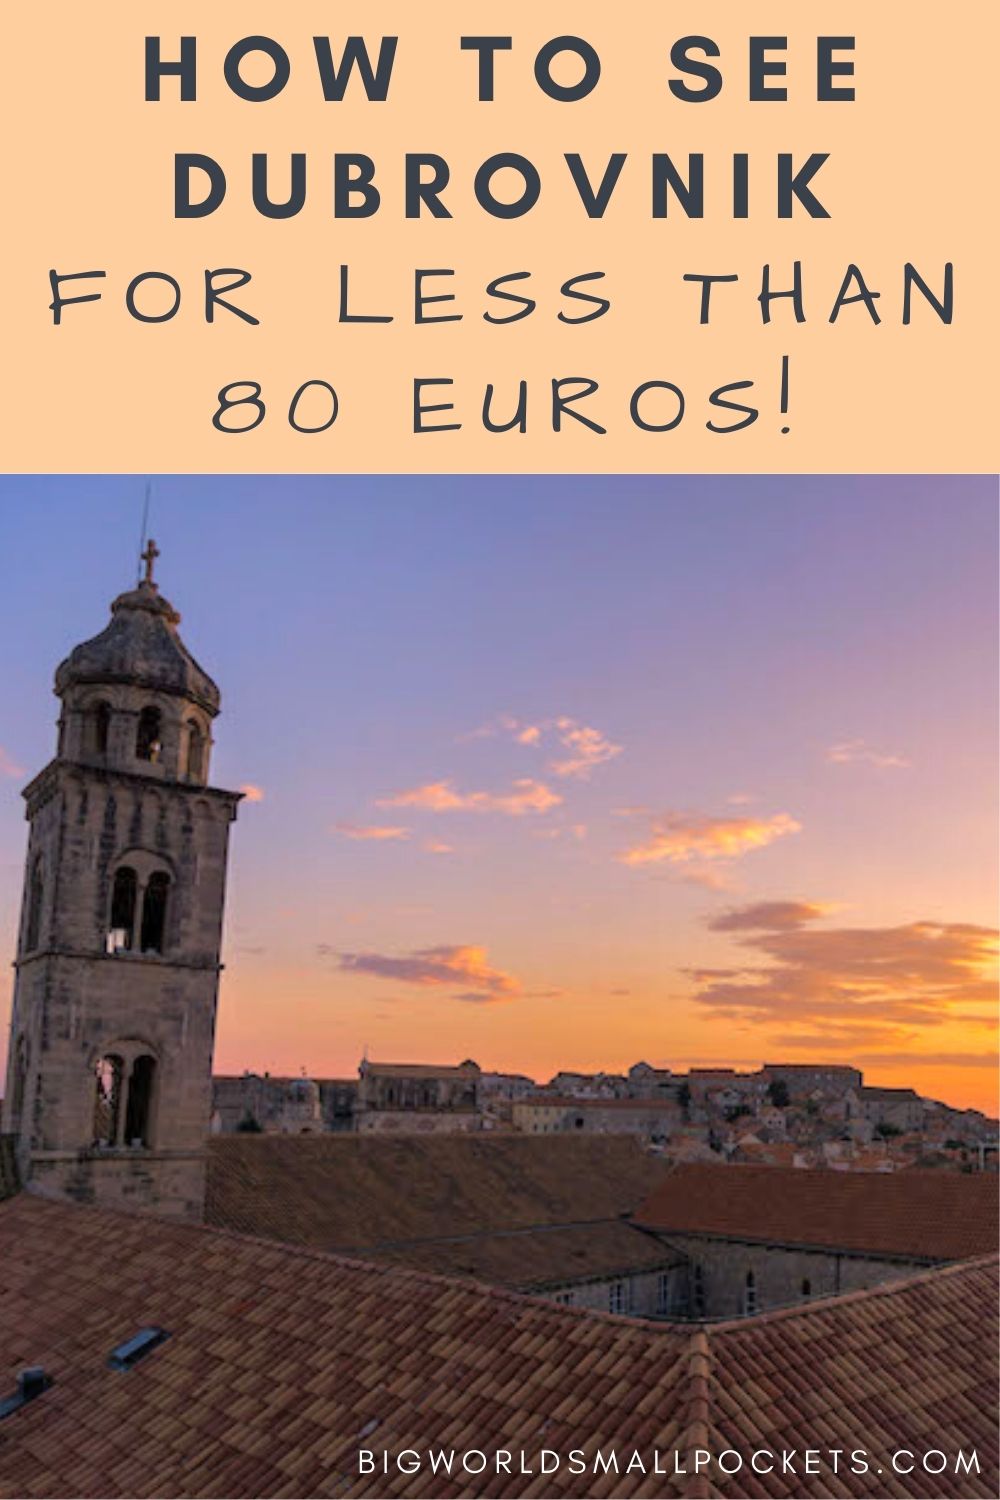 How To See Dubrovnik in Croatia for Less than 80 Euros!